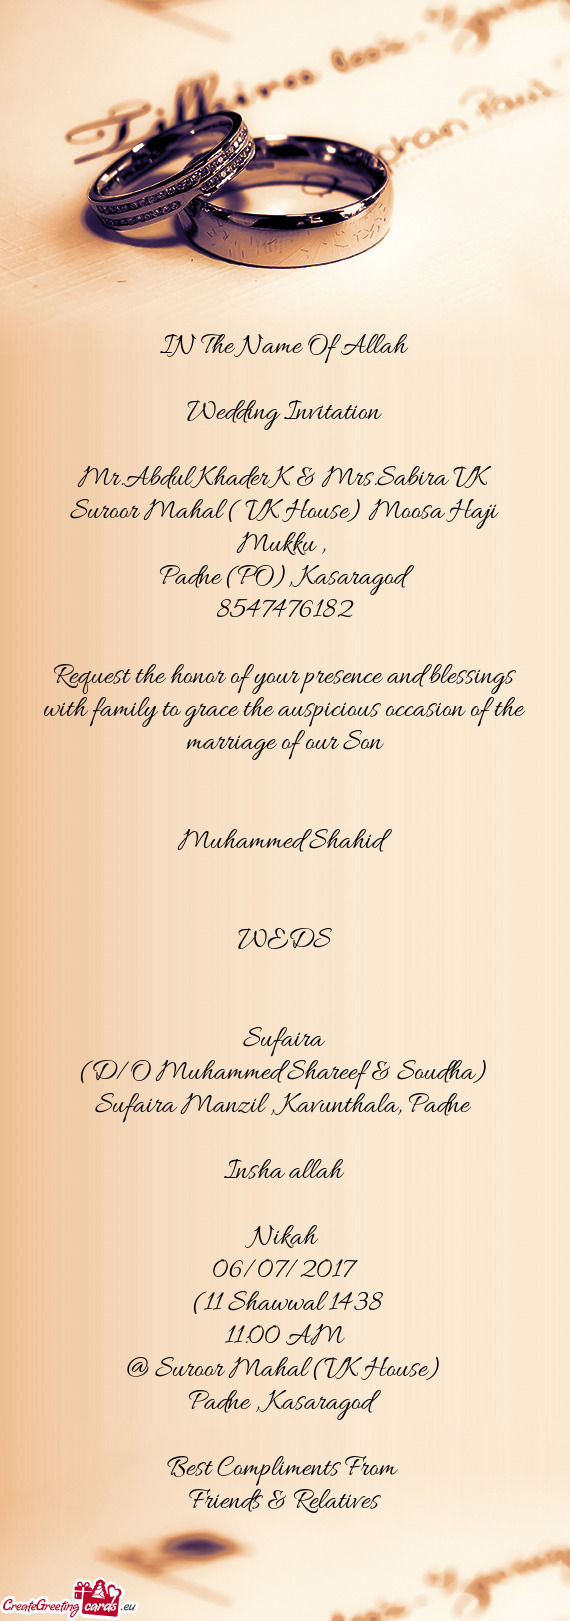 Request the honor of your presence and blessings with family to grace the auspicious occasion of the